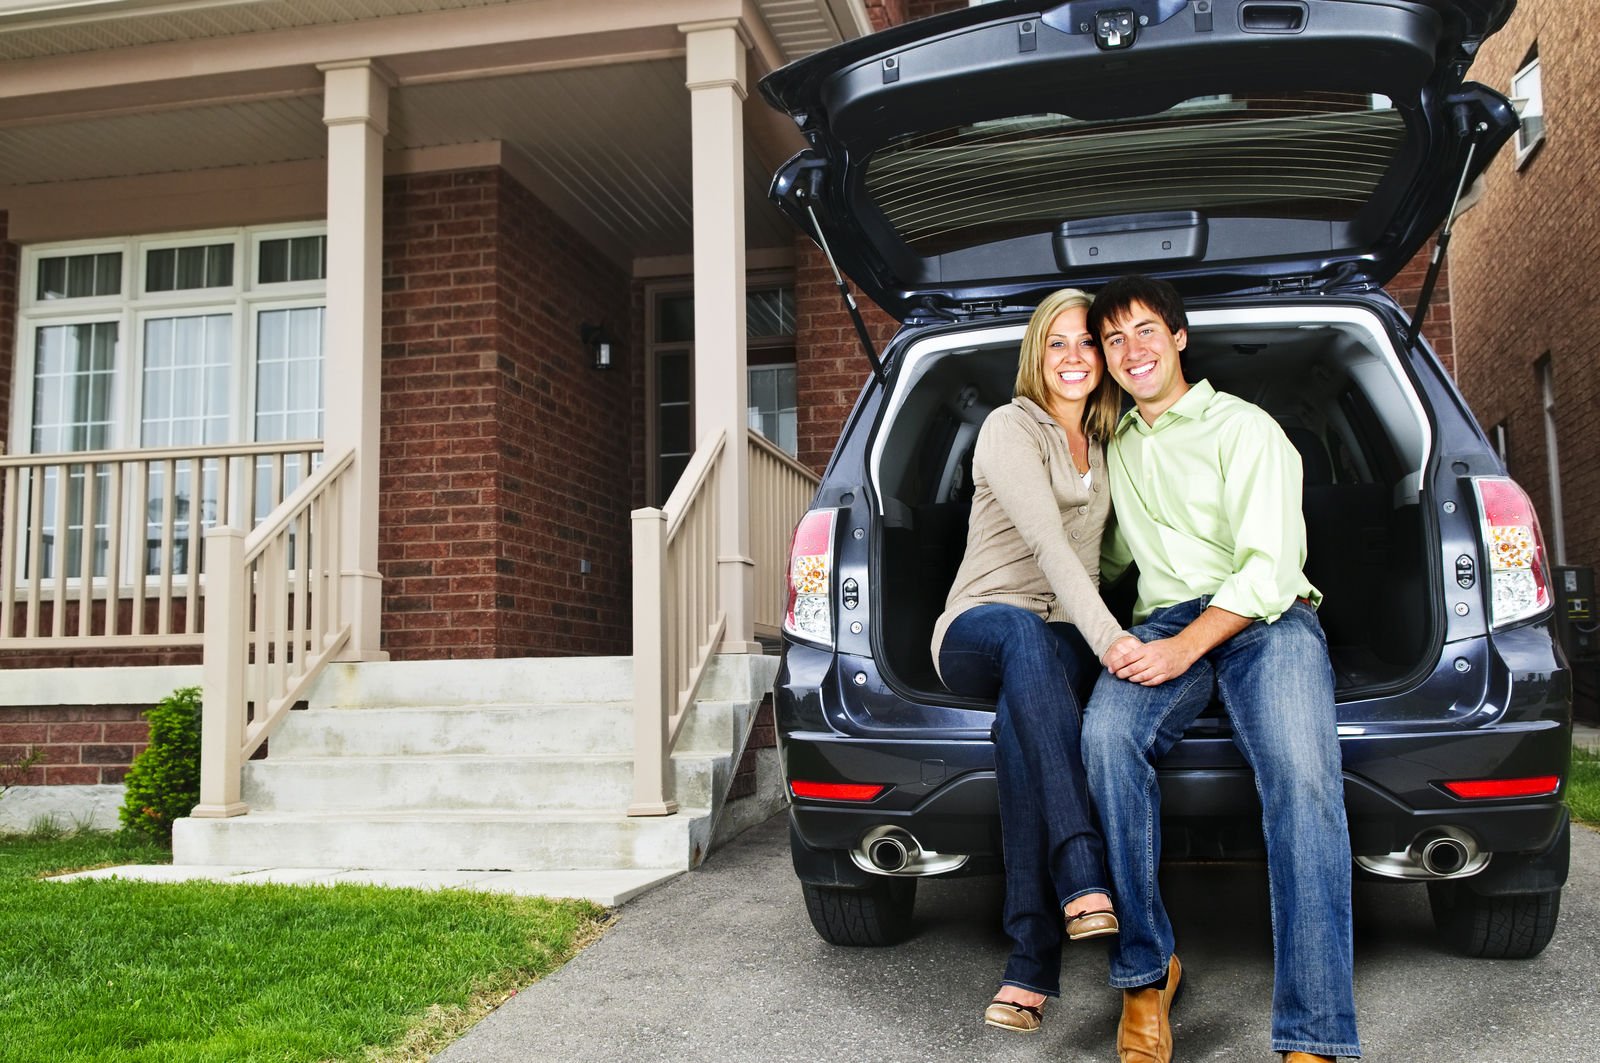 Can married couples have separate car insurance policies?